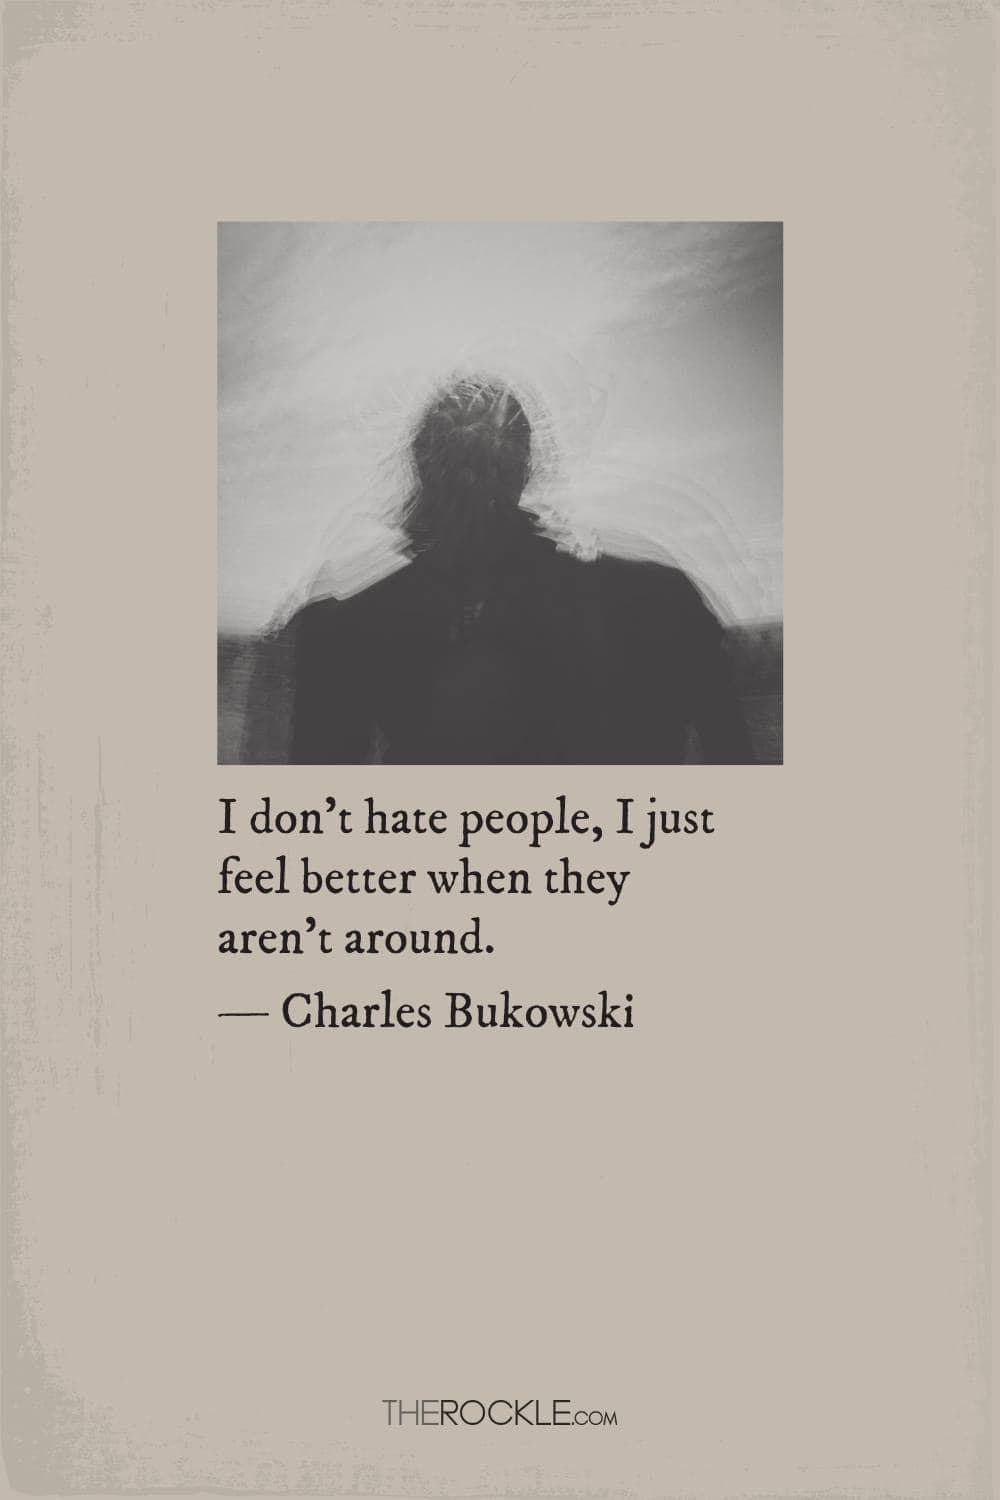 Bukowski quote about introversion